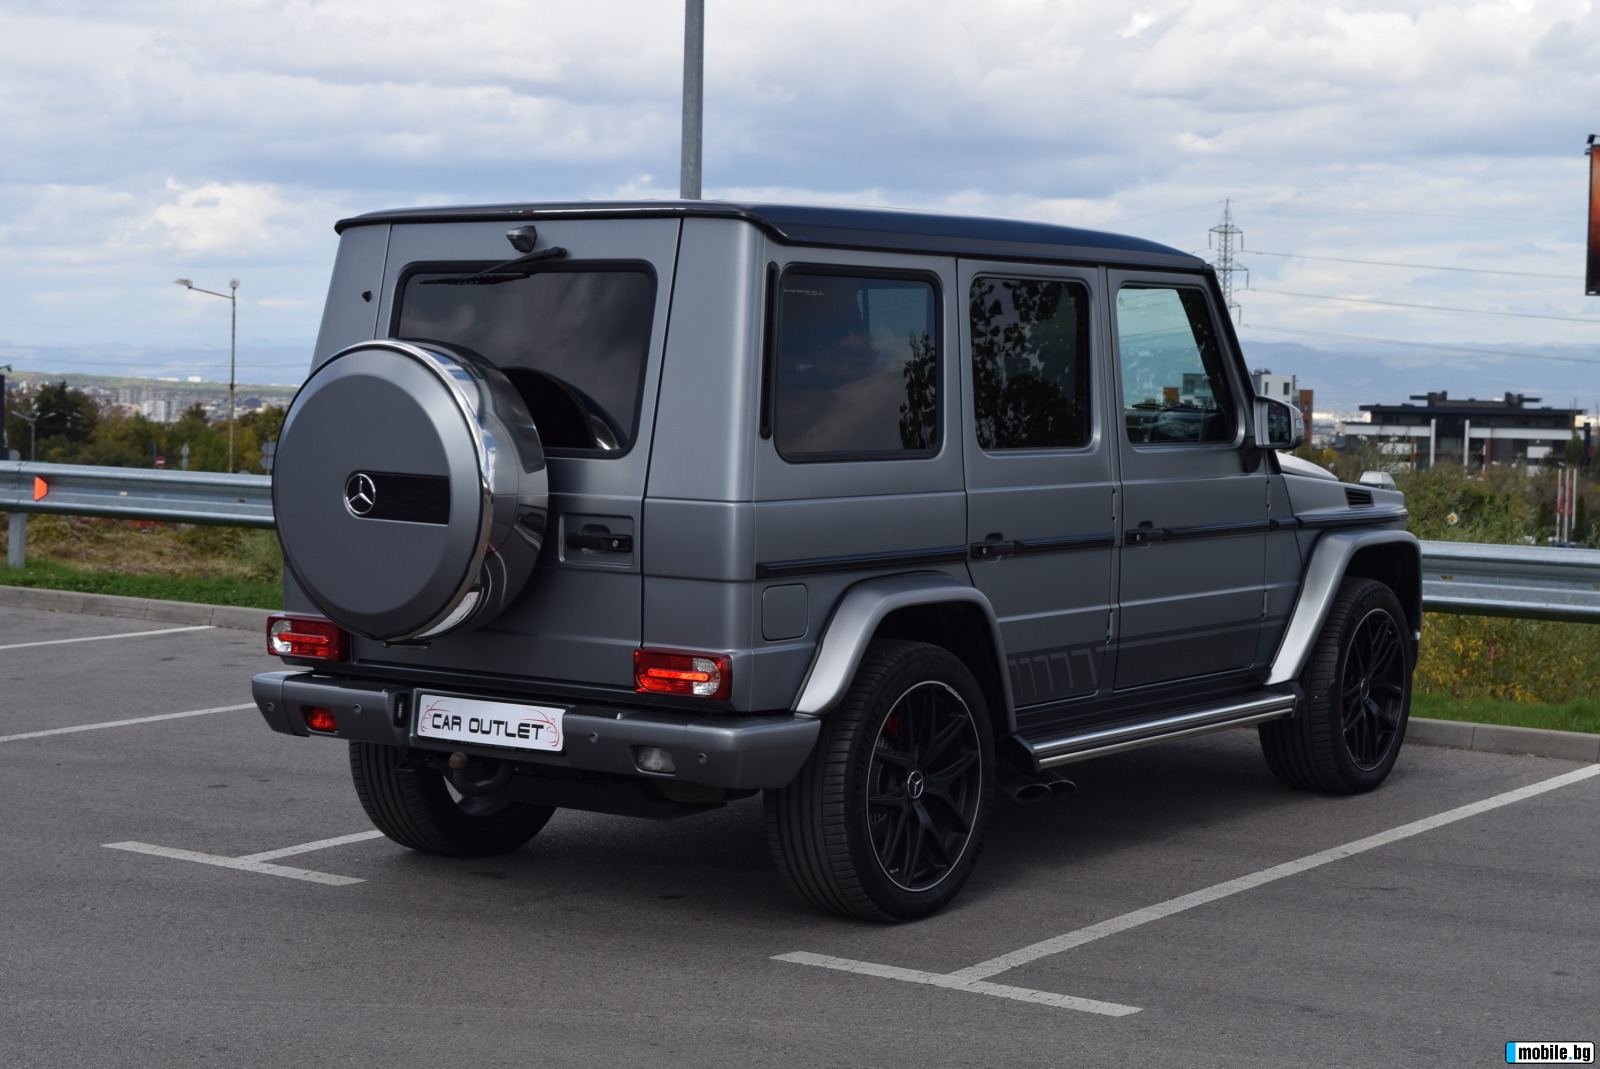 Mercedes-Benz G 63 AMG Exclusive Edition | Mobile.bg   17